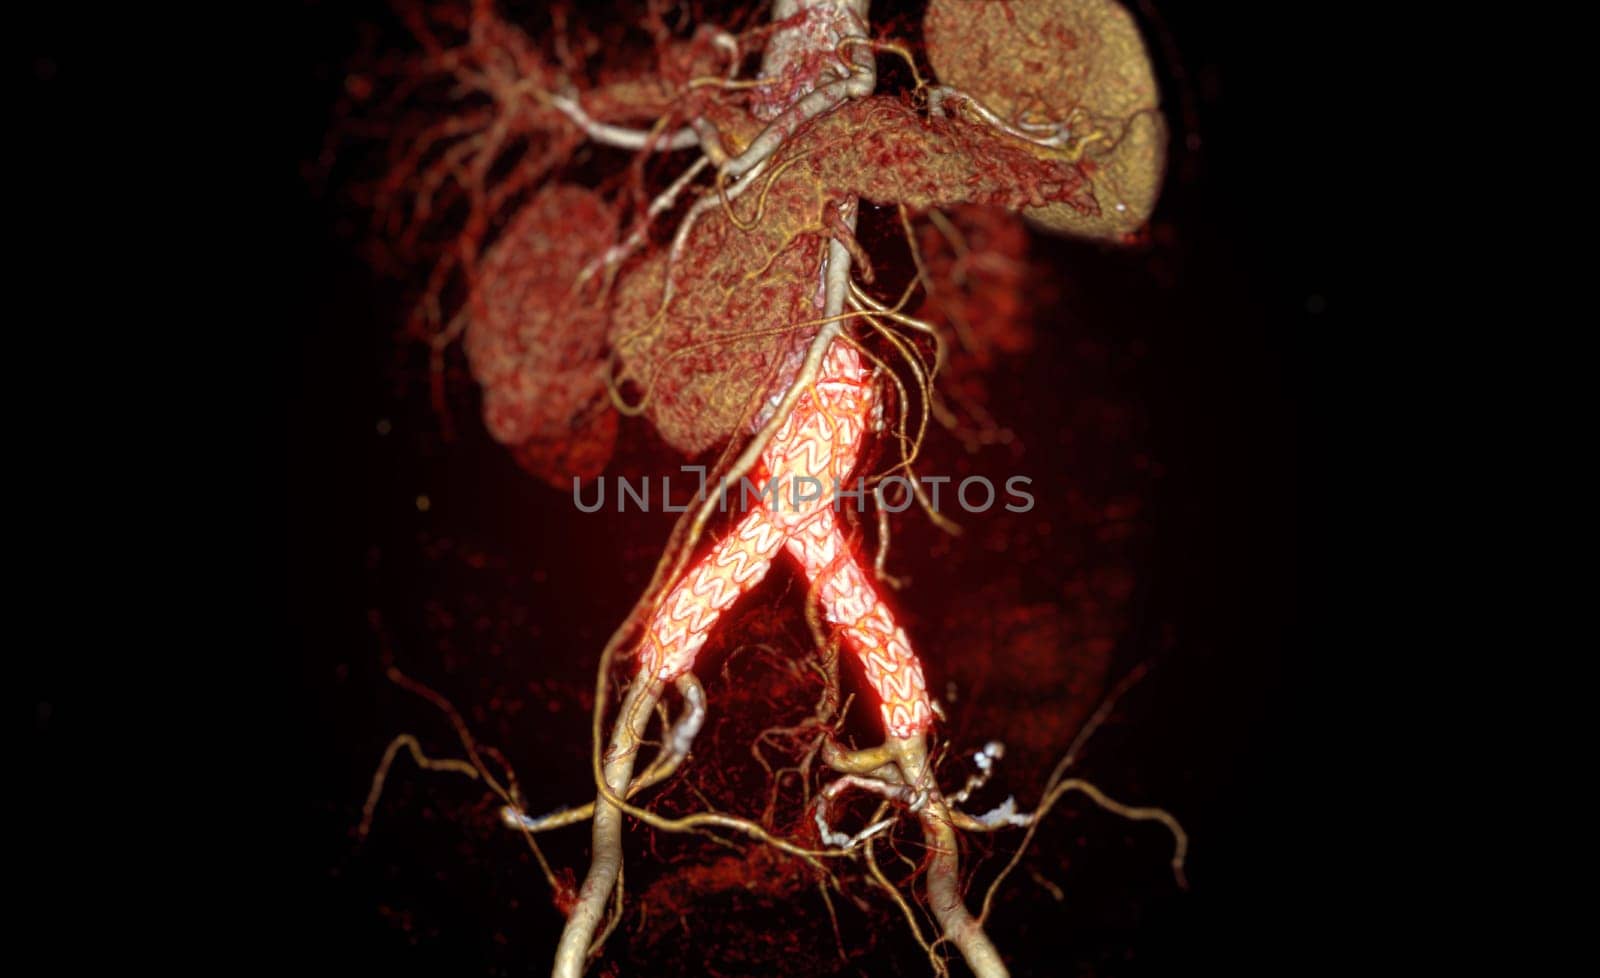 CTA of the aorta with stent-grafting in patient Abdominal aortic aneurysm. by samunella